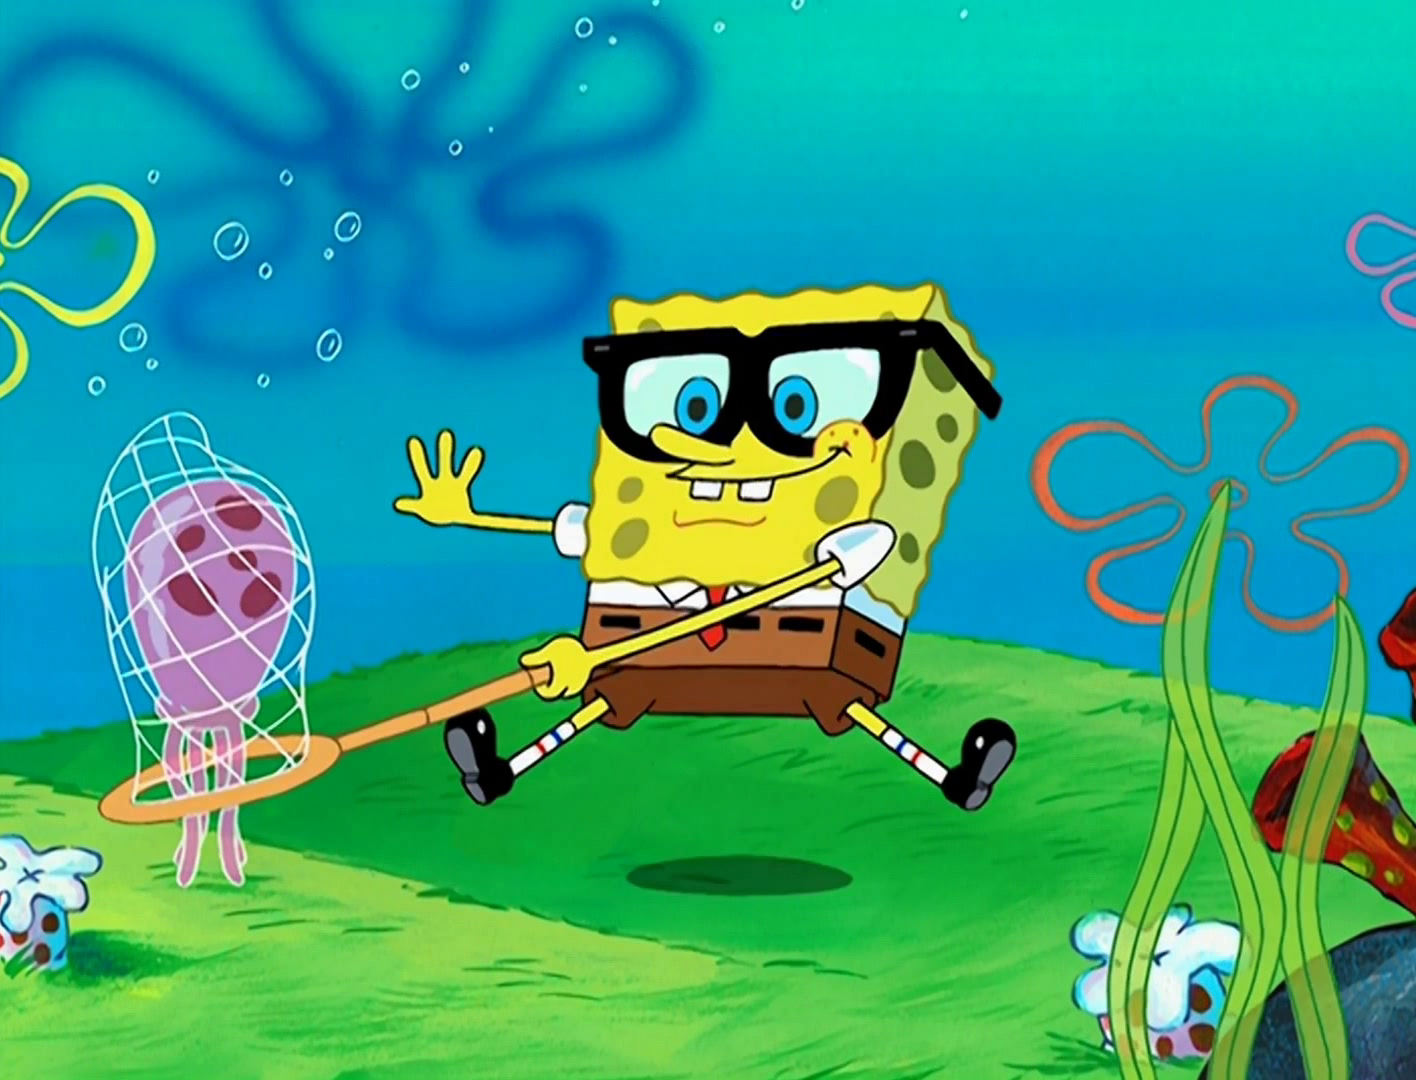 https://static.wikia.nocookie.net/spongebob/images/a/ab/Jellyfish_Hunter_004.png/revision/latest/scale-to-width-down/1416?cb=20191214233514